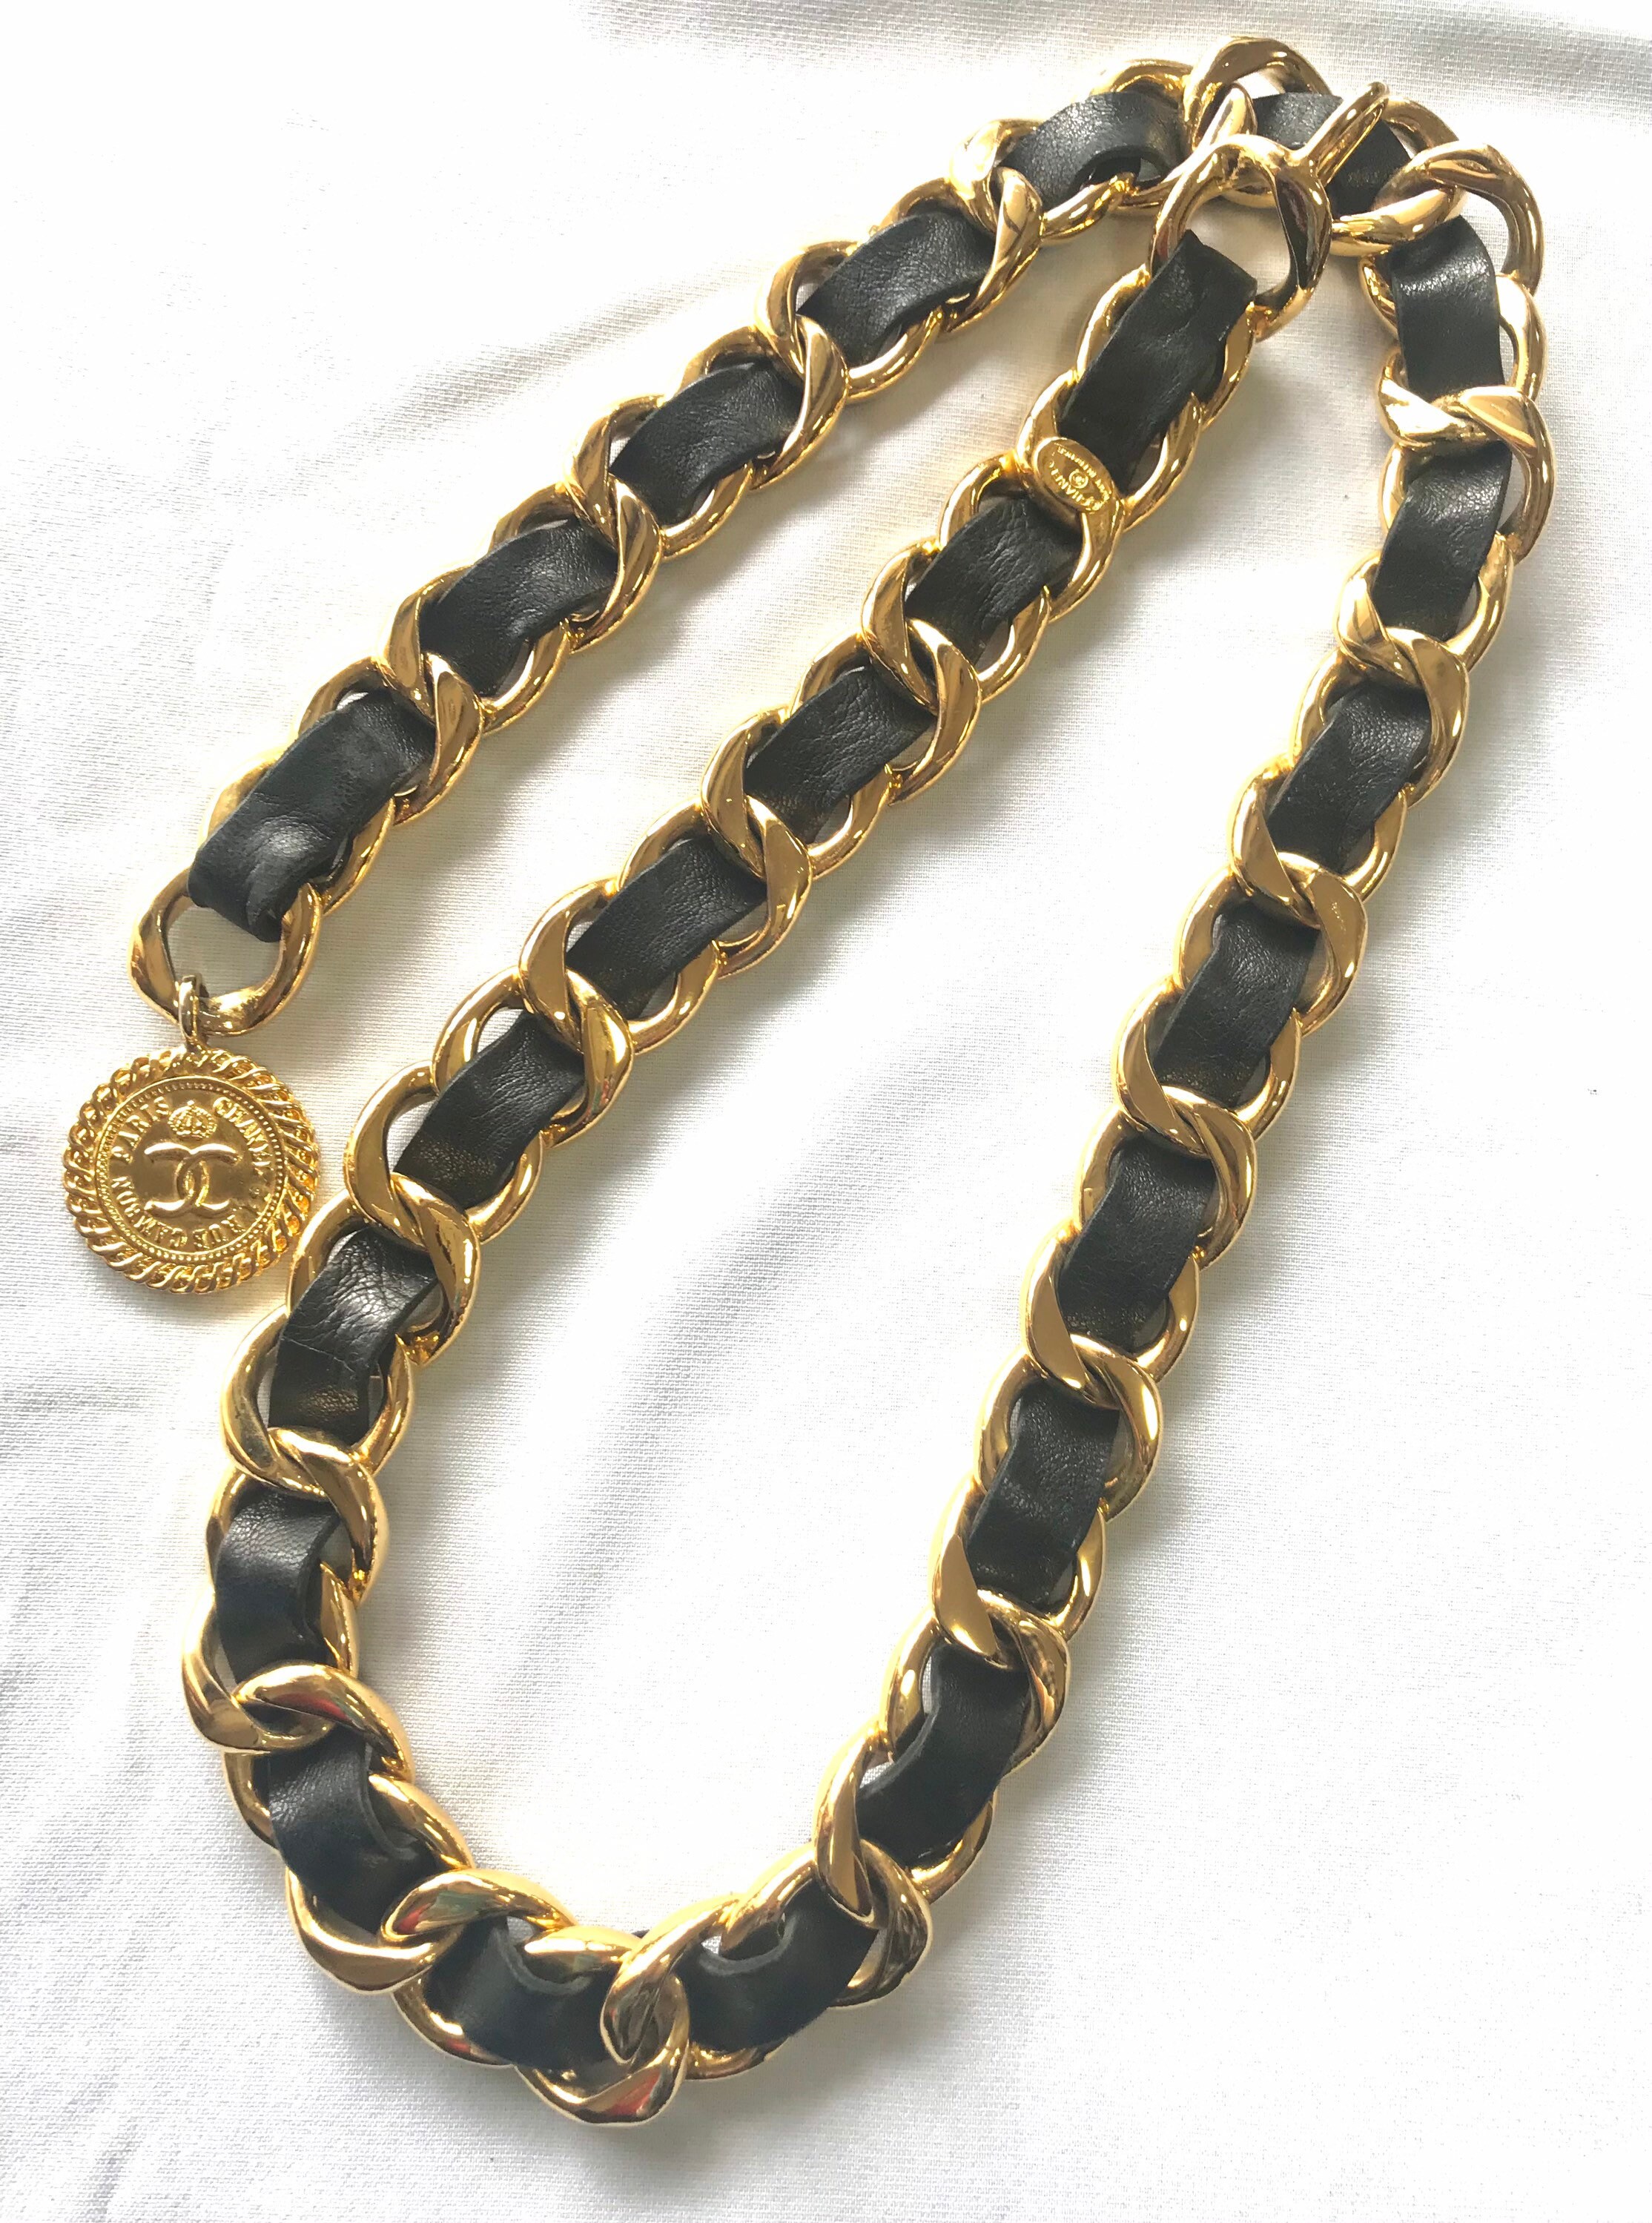 Vintage CHANEL Black Leather Thick Chain Belt With Golden 